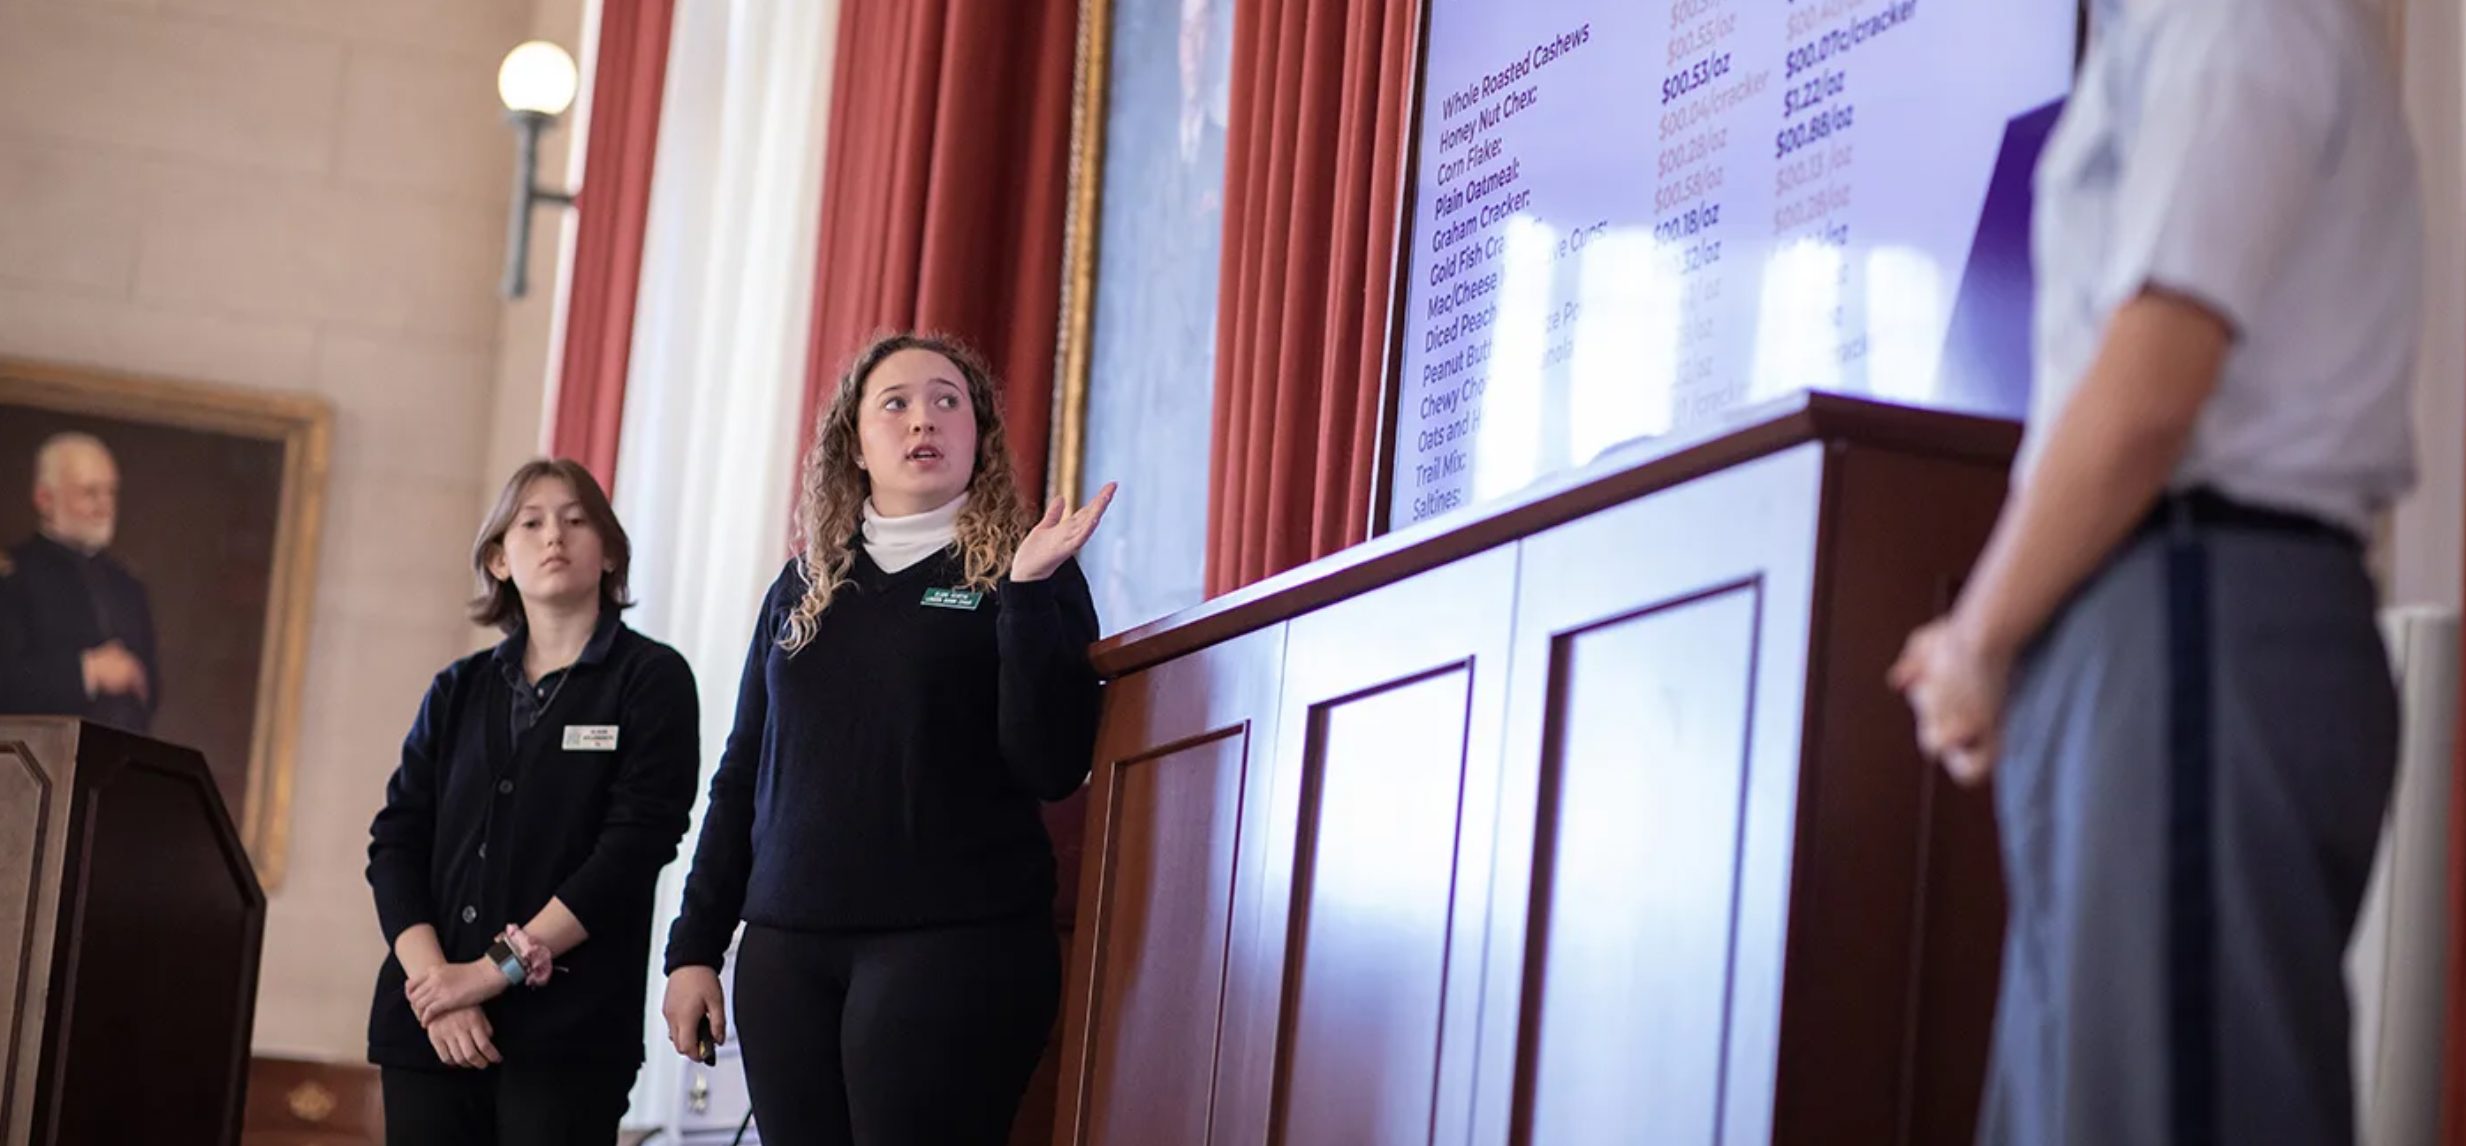 Eleni Kurtis '23 presents a proposal from the Ace team as Alison Aylesworth looks on.